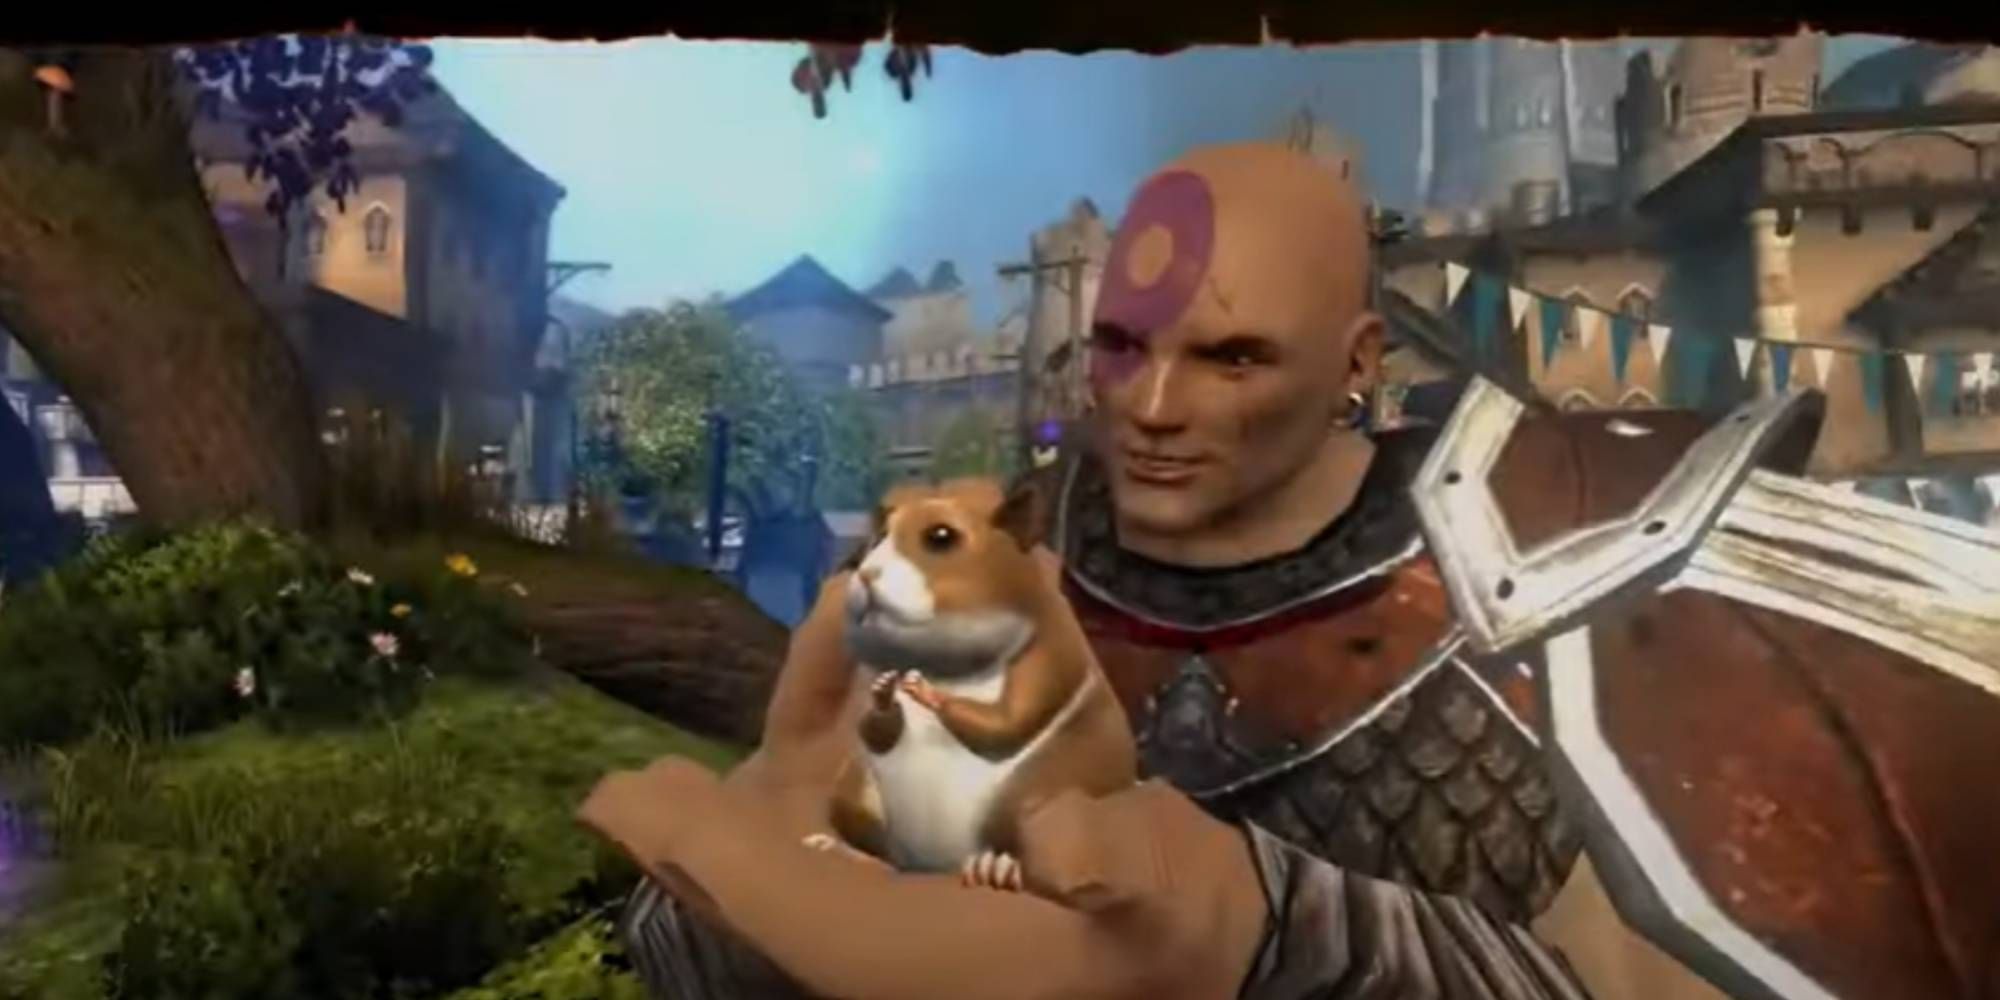 Minsc with his giant space hamster Boo in Baldur's Gate